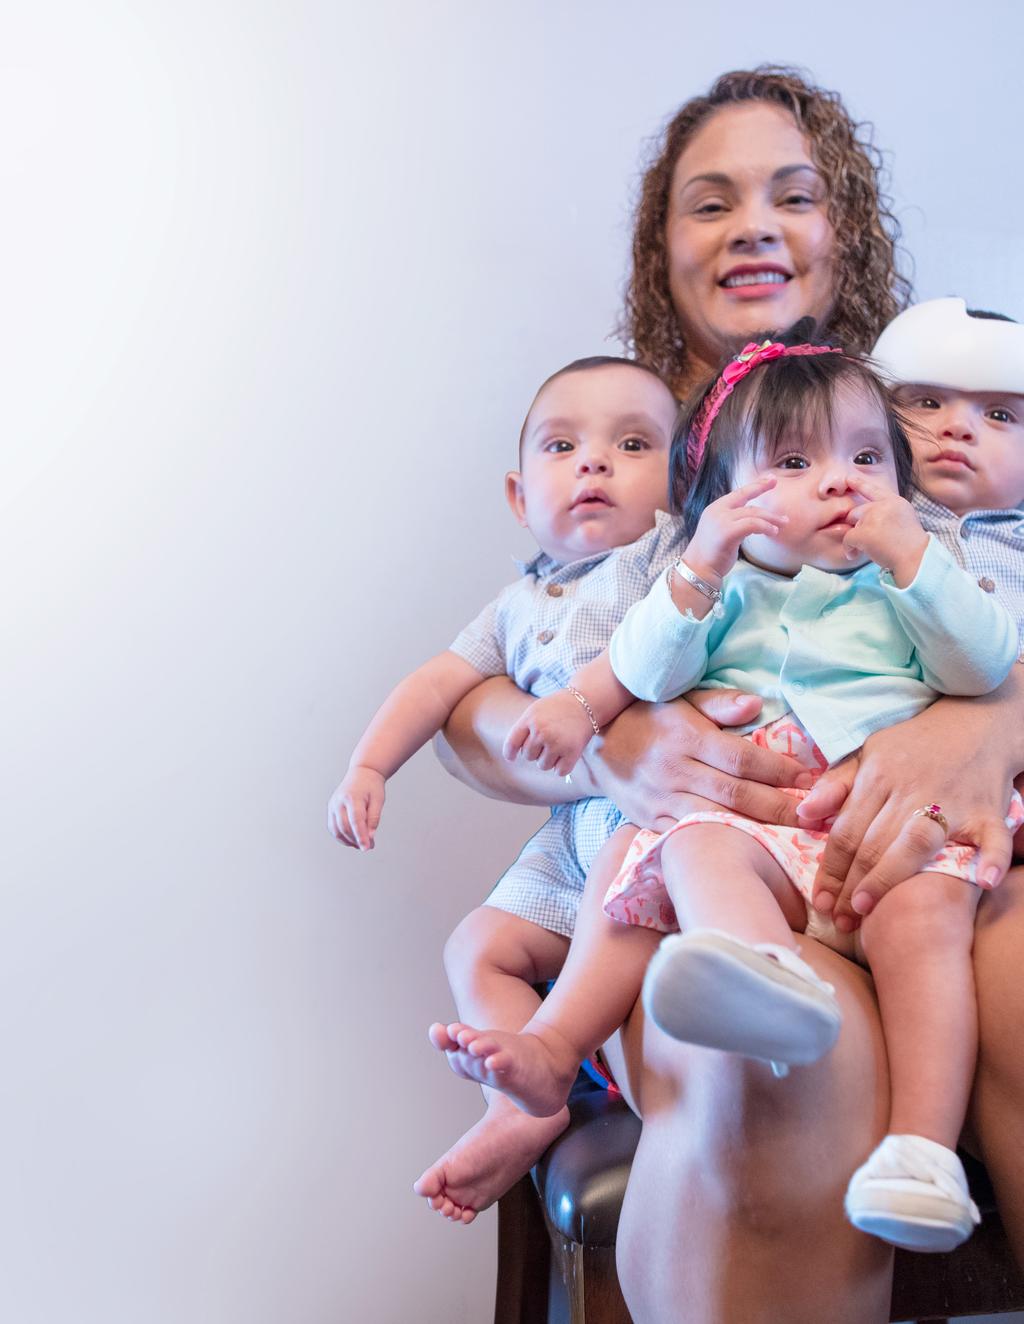 Healthy Heartbeats, Times Three! Rebeca Gomez joined our Medallion plan when she learned she was pregnant. But it was no typical pregnancy: she was carrying triplets.